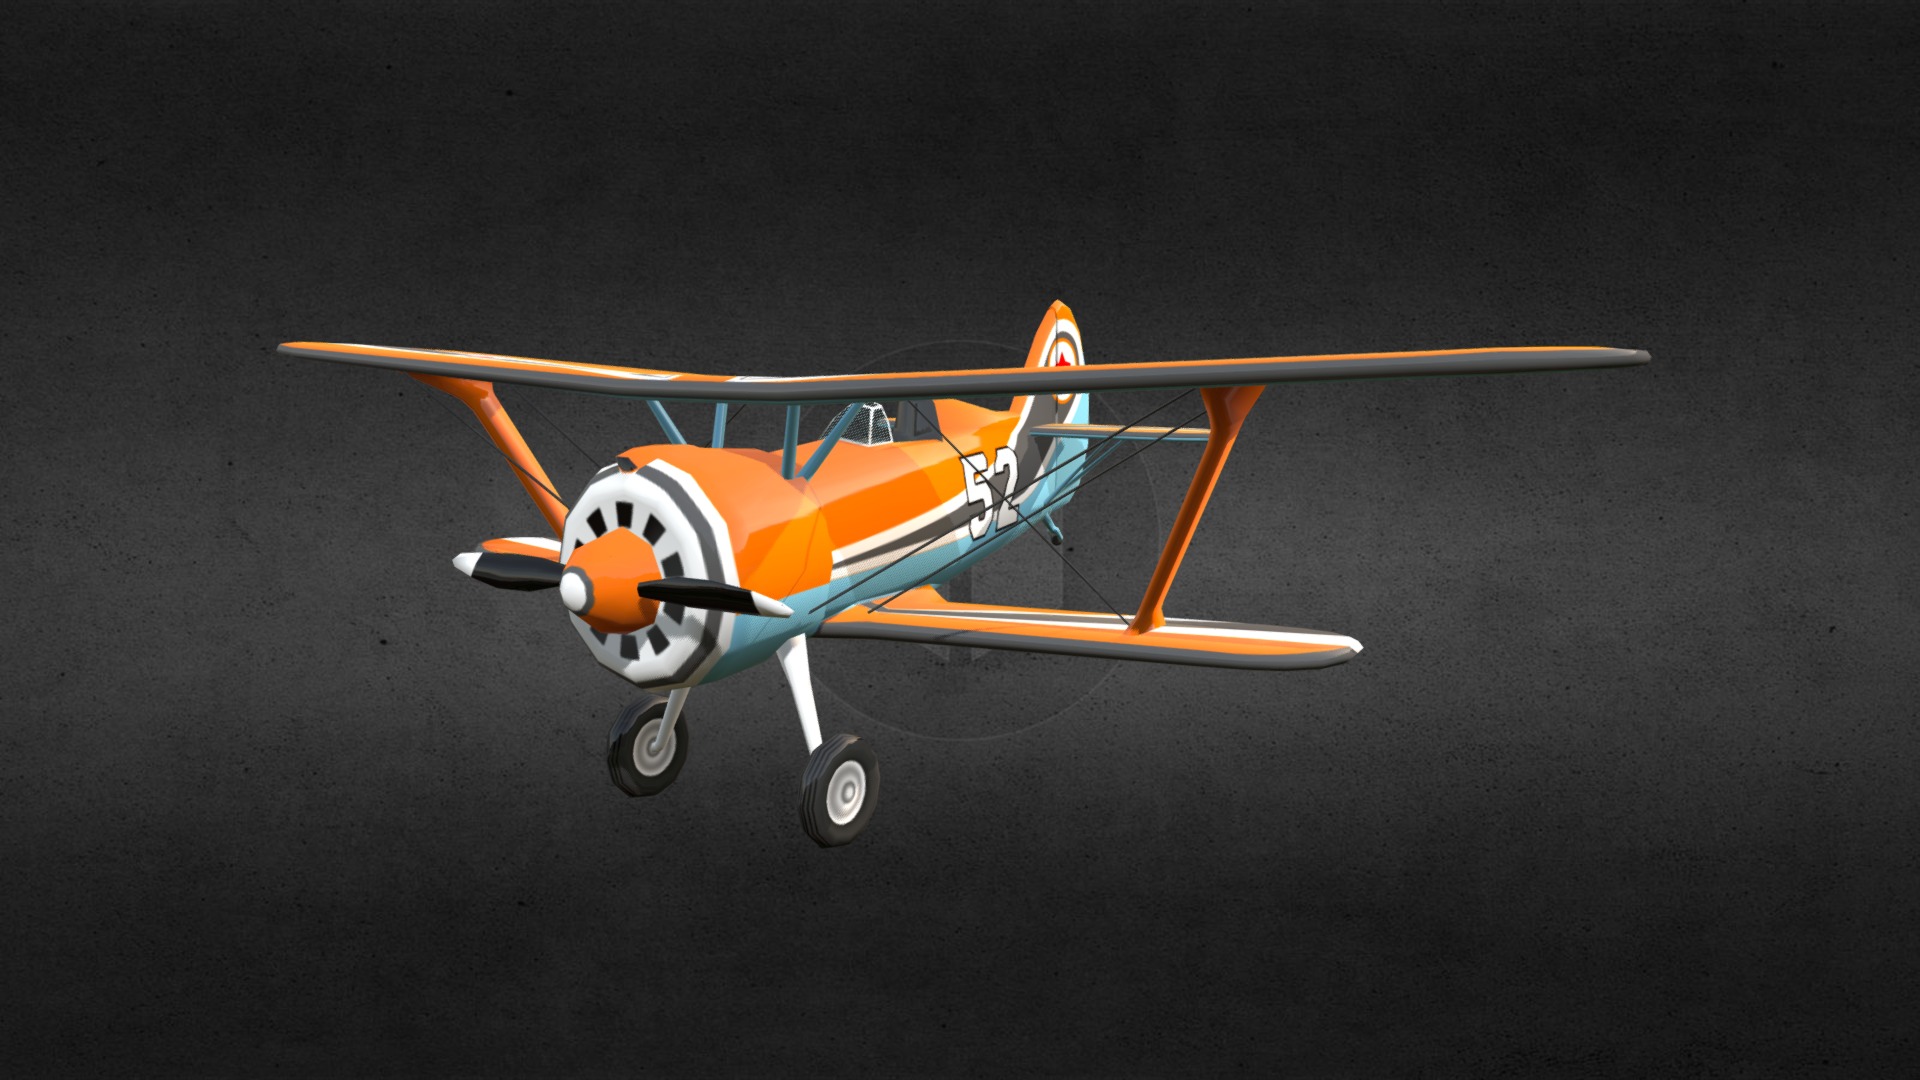 3D model Toy aeroplane - This is a 3D model of the Toy aeroplane. The 3D model is about an orange and white airplane.